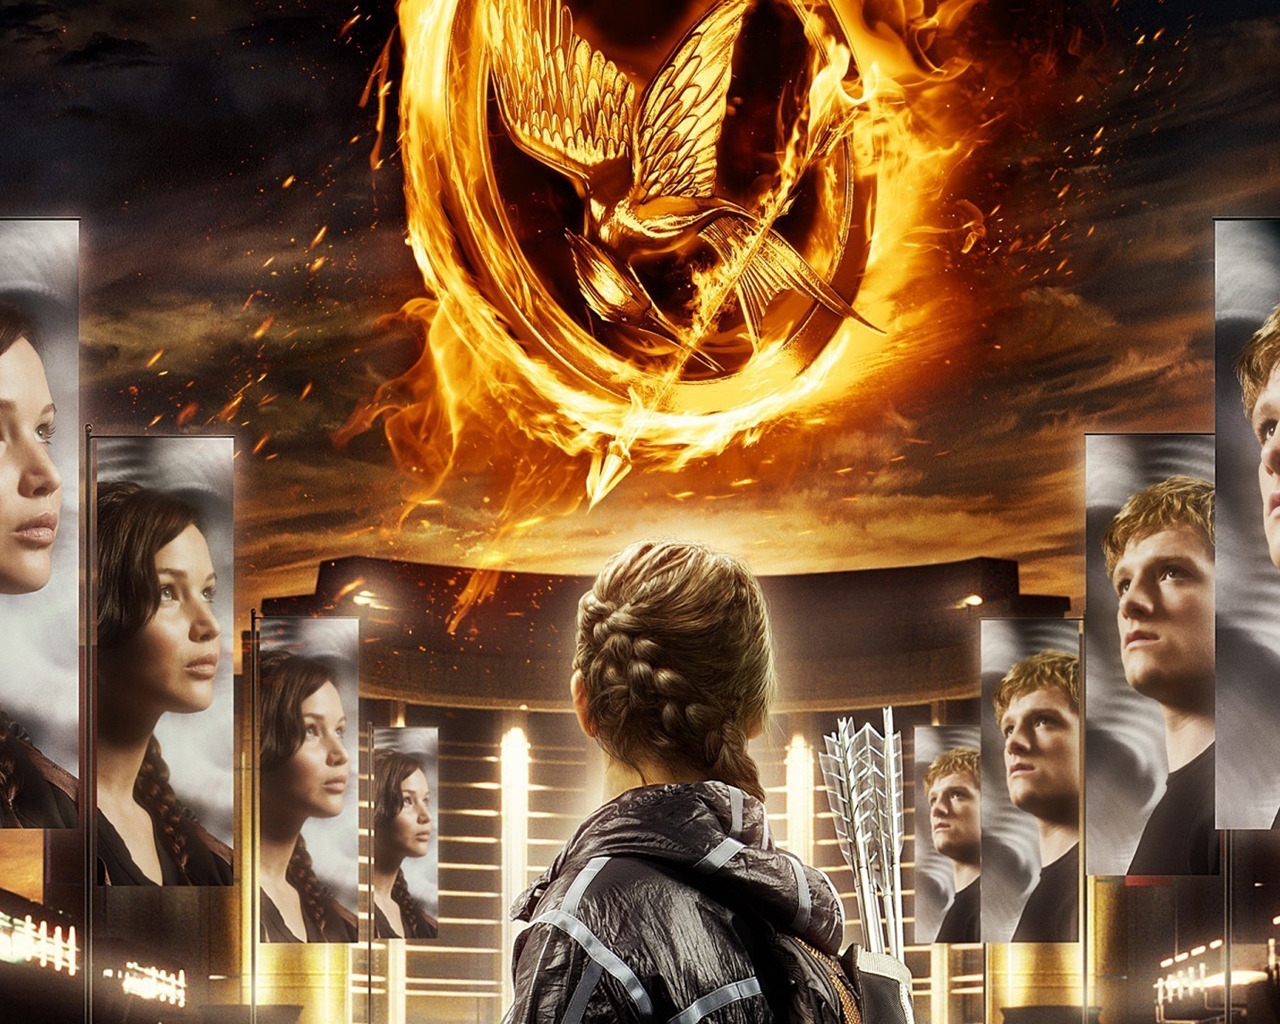 The Hunger Games Poster for 1280 x 1024 resolution